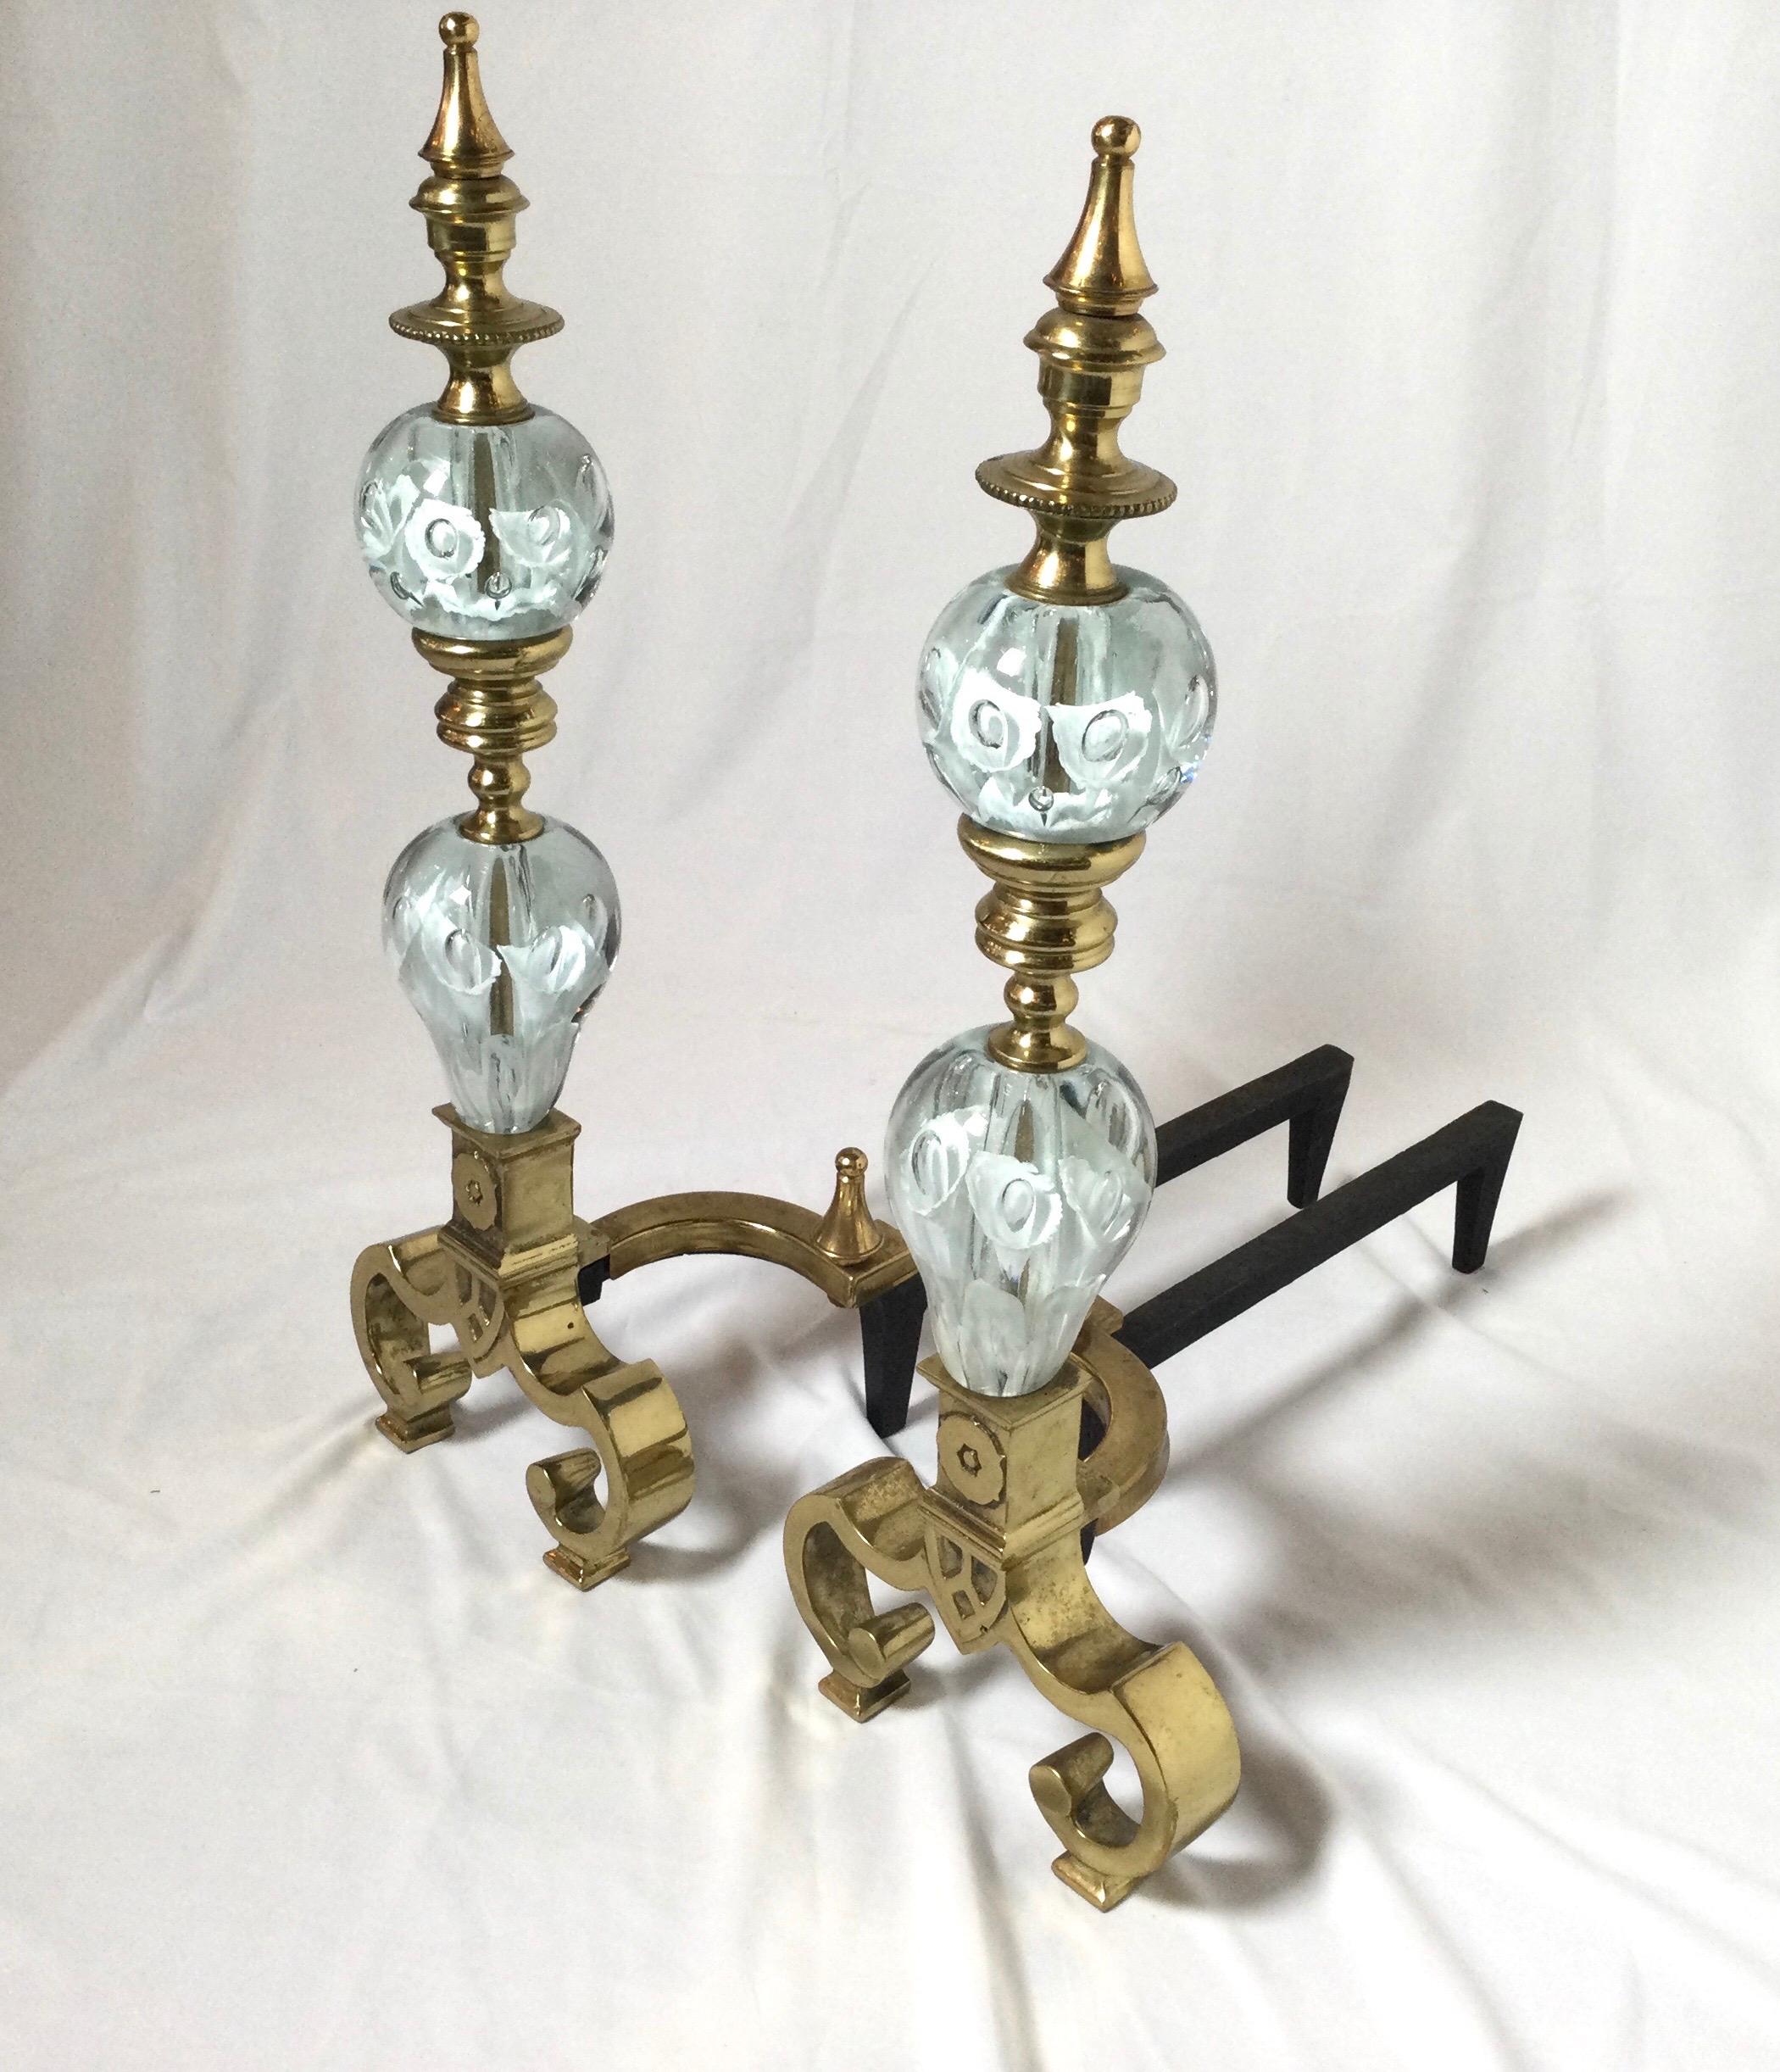 Hollywood Regency Saint Clair art glass andirons. Clear glass with white floral design and bubbles in the glass. 23